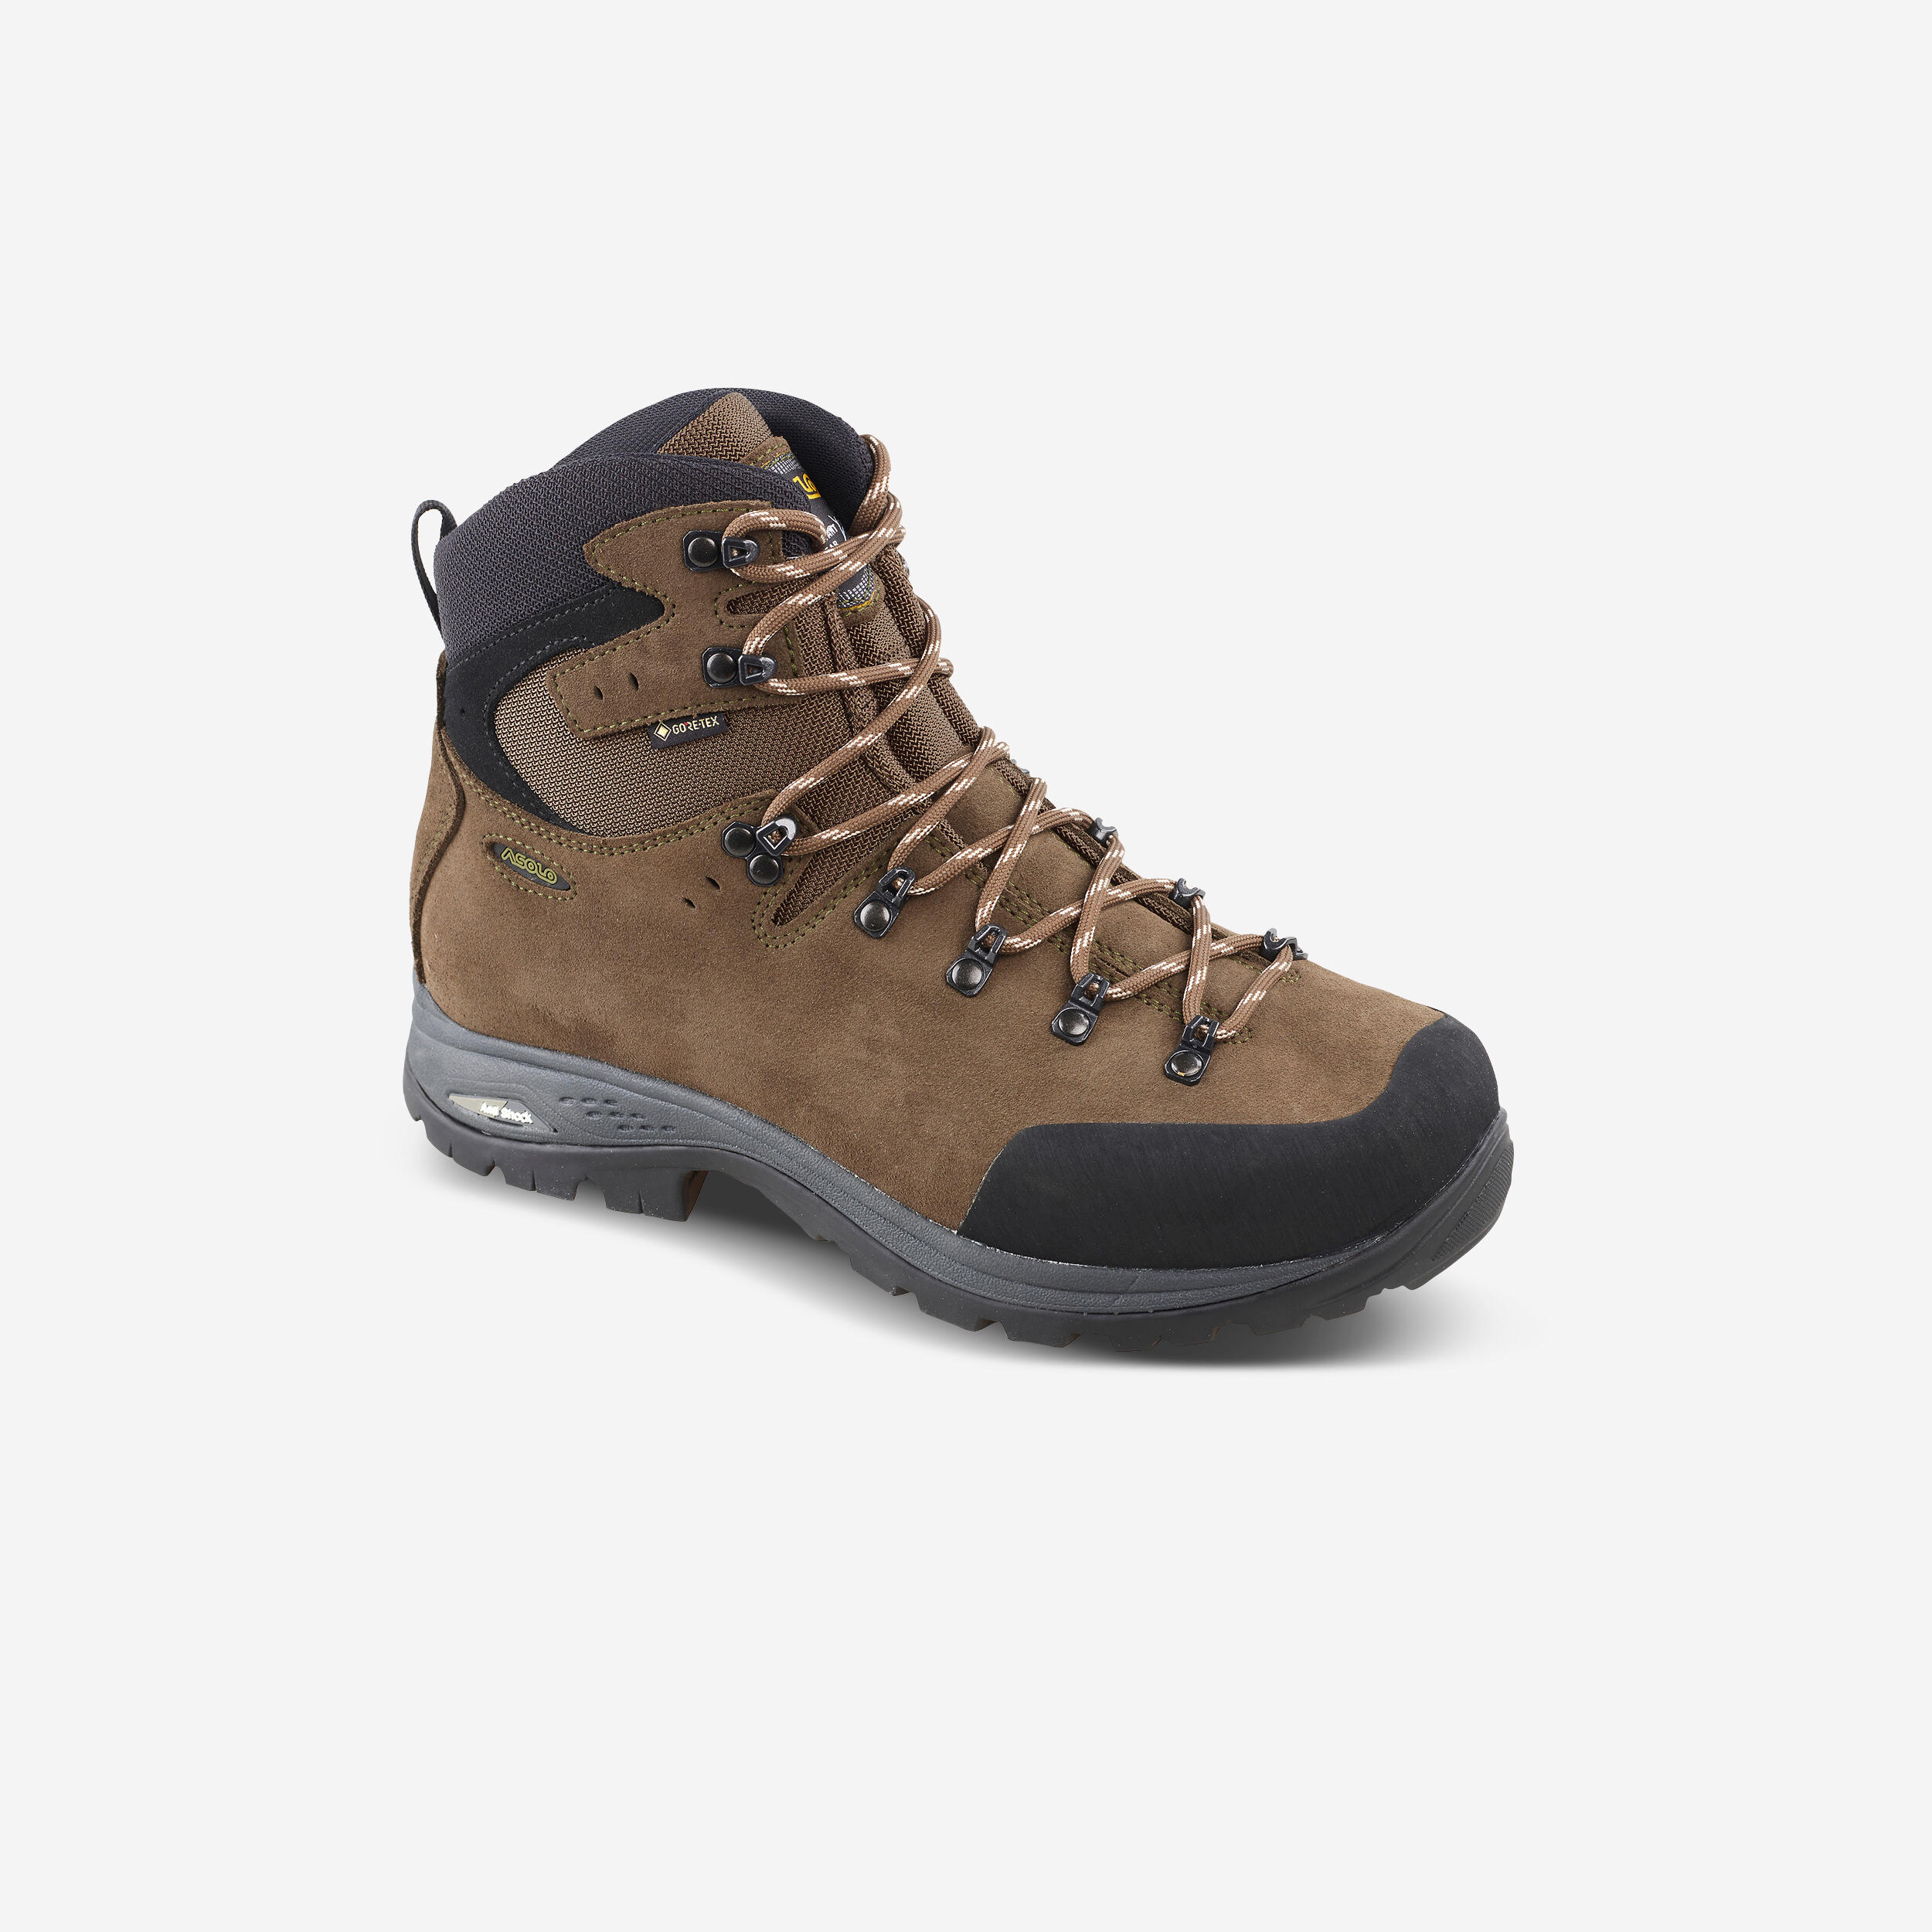 Waterproof Country Sport Boots Asolo X-Hunt Forest Gore-Tex Vibram 1/14